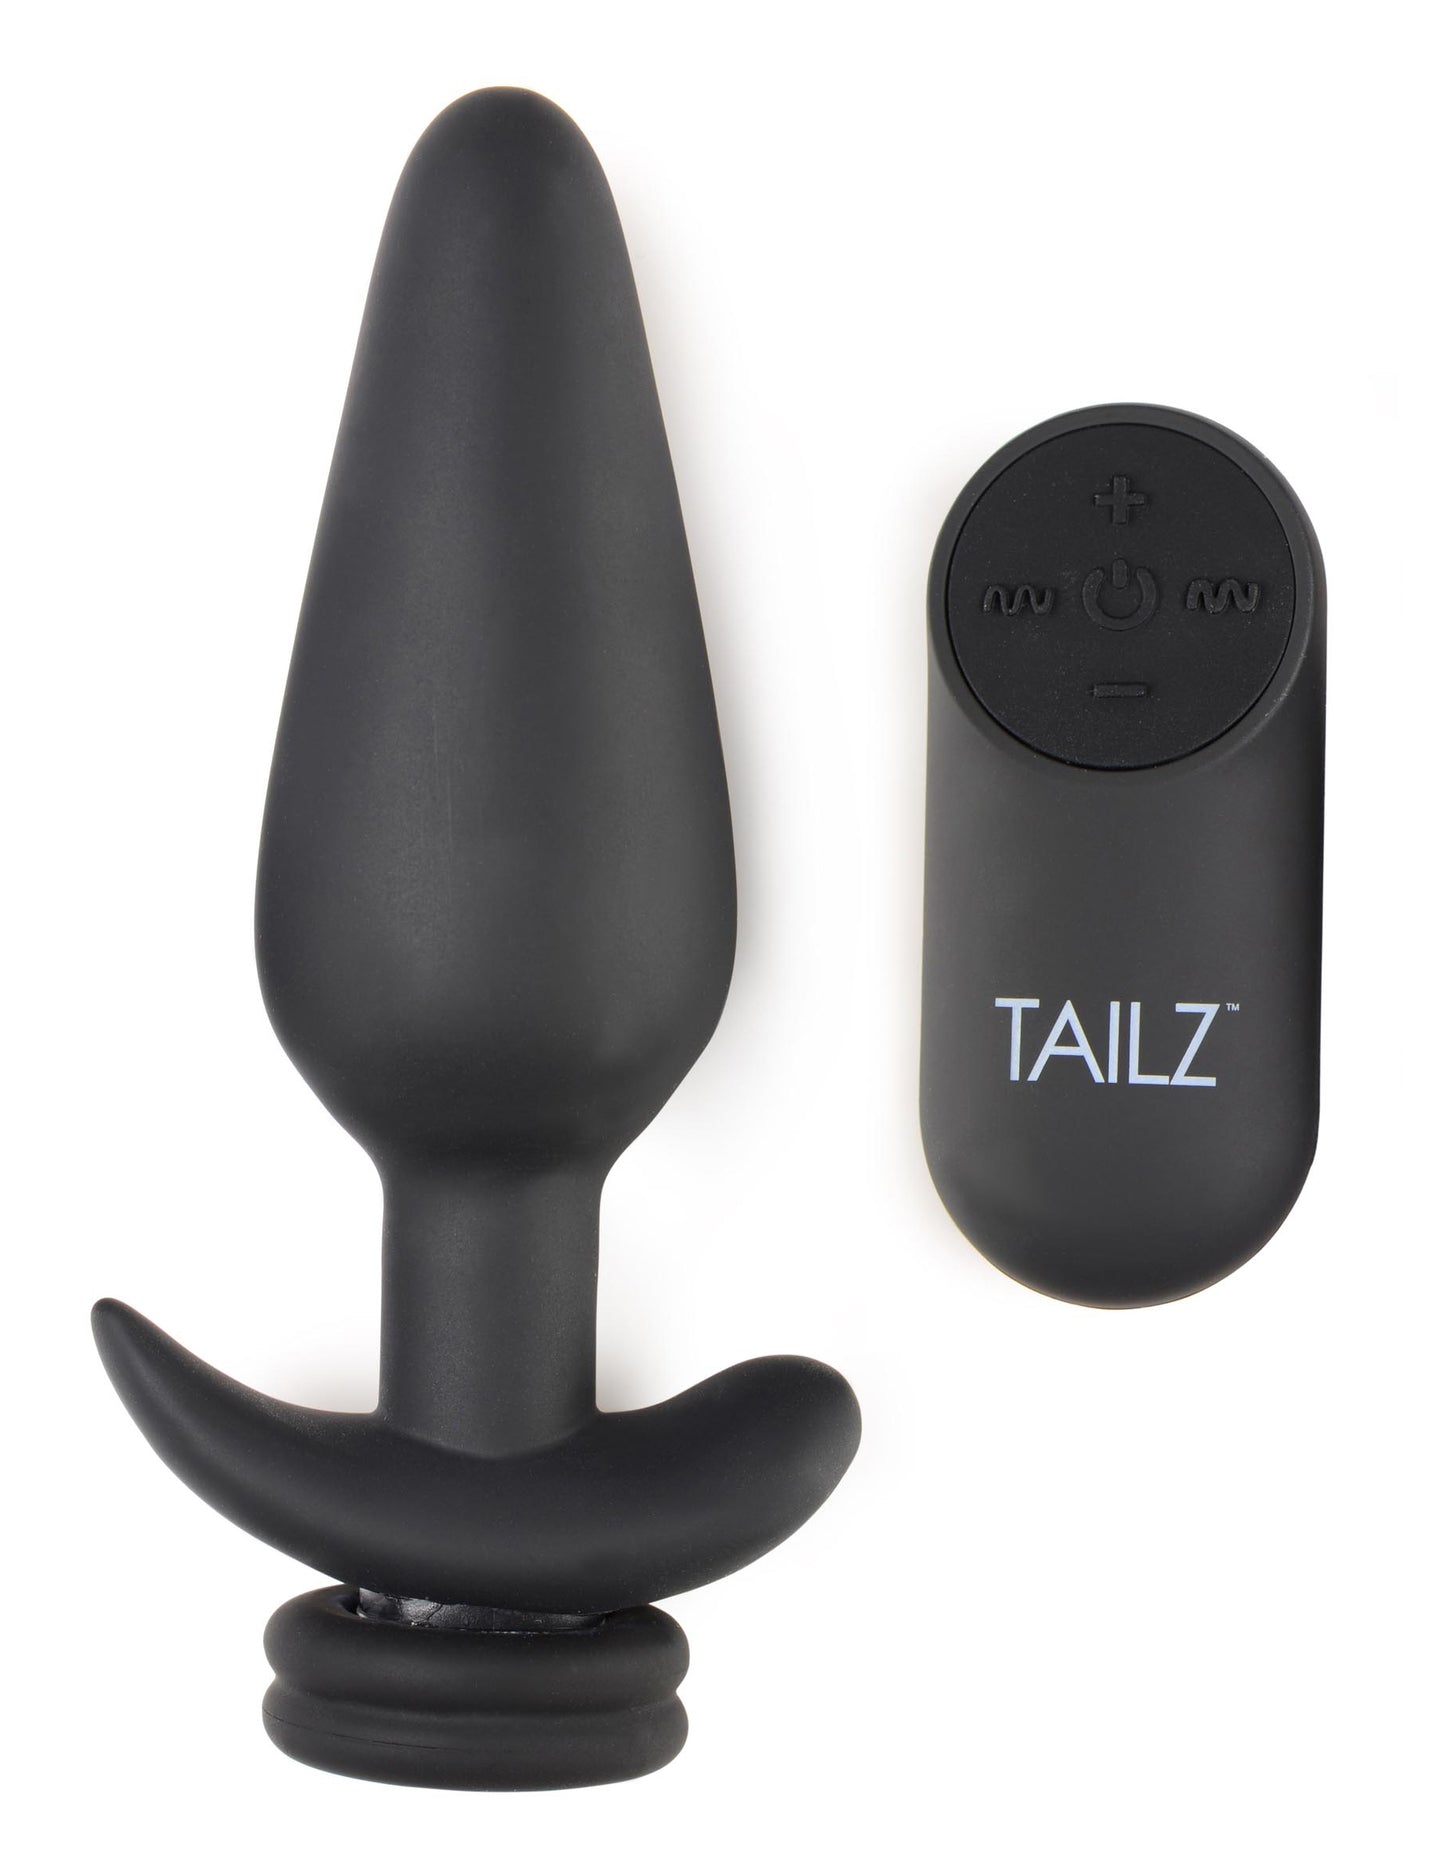 Large Vibrating Anal Plug with Interchangeable Fox Tail - Black - UABDSM